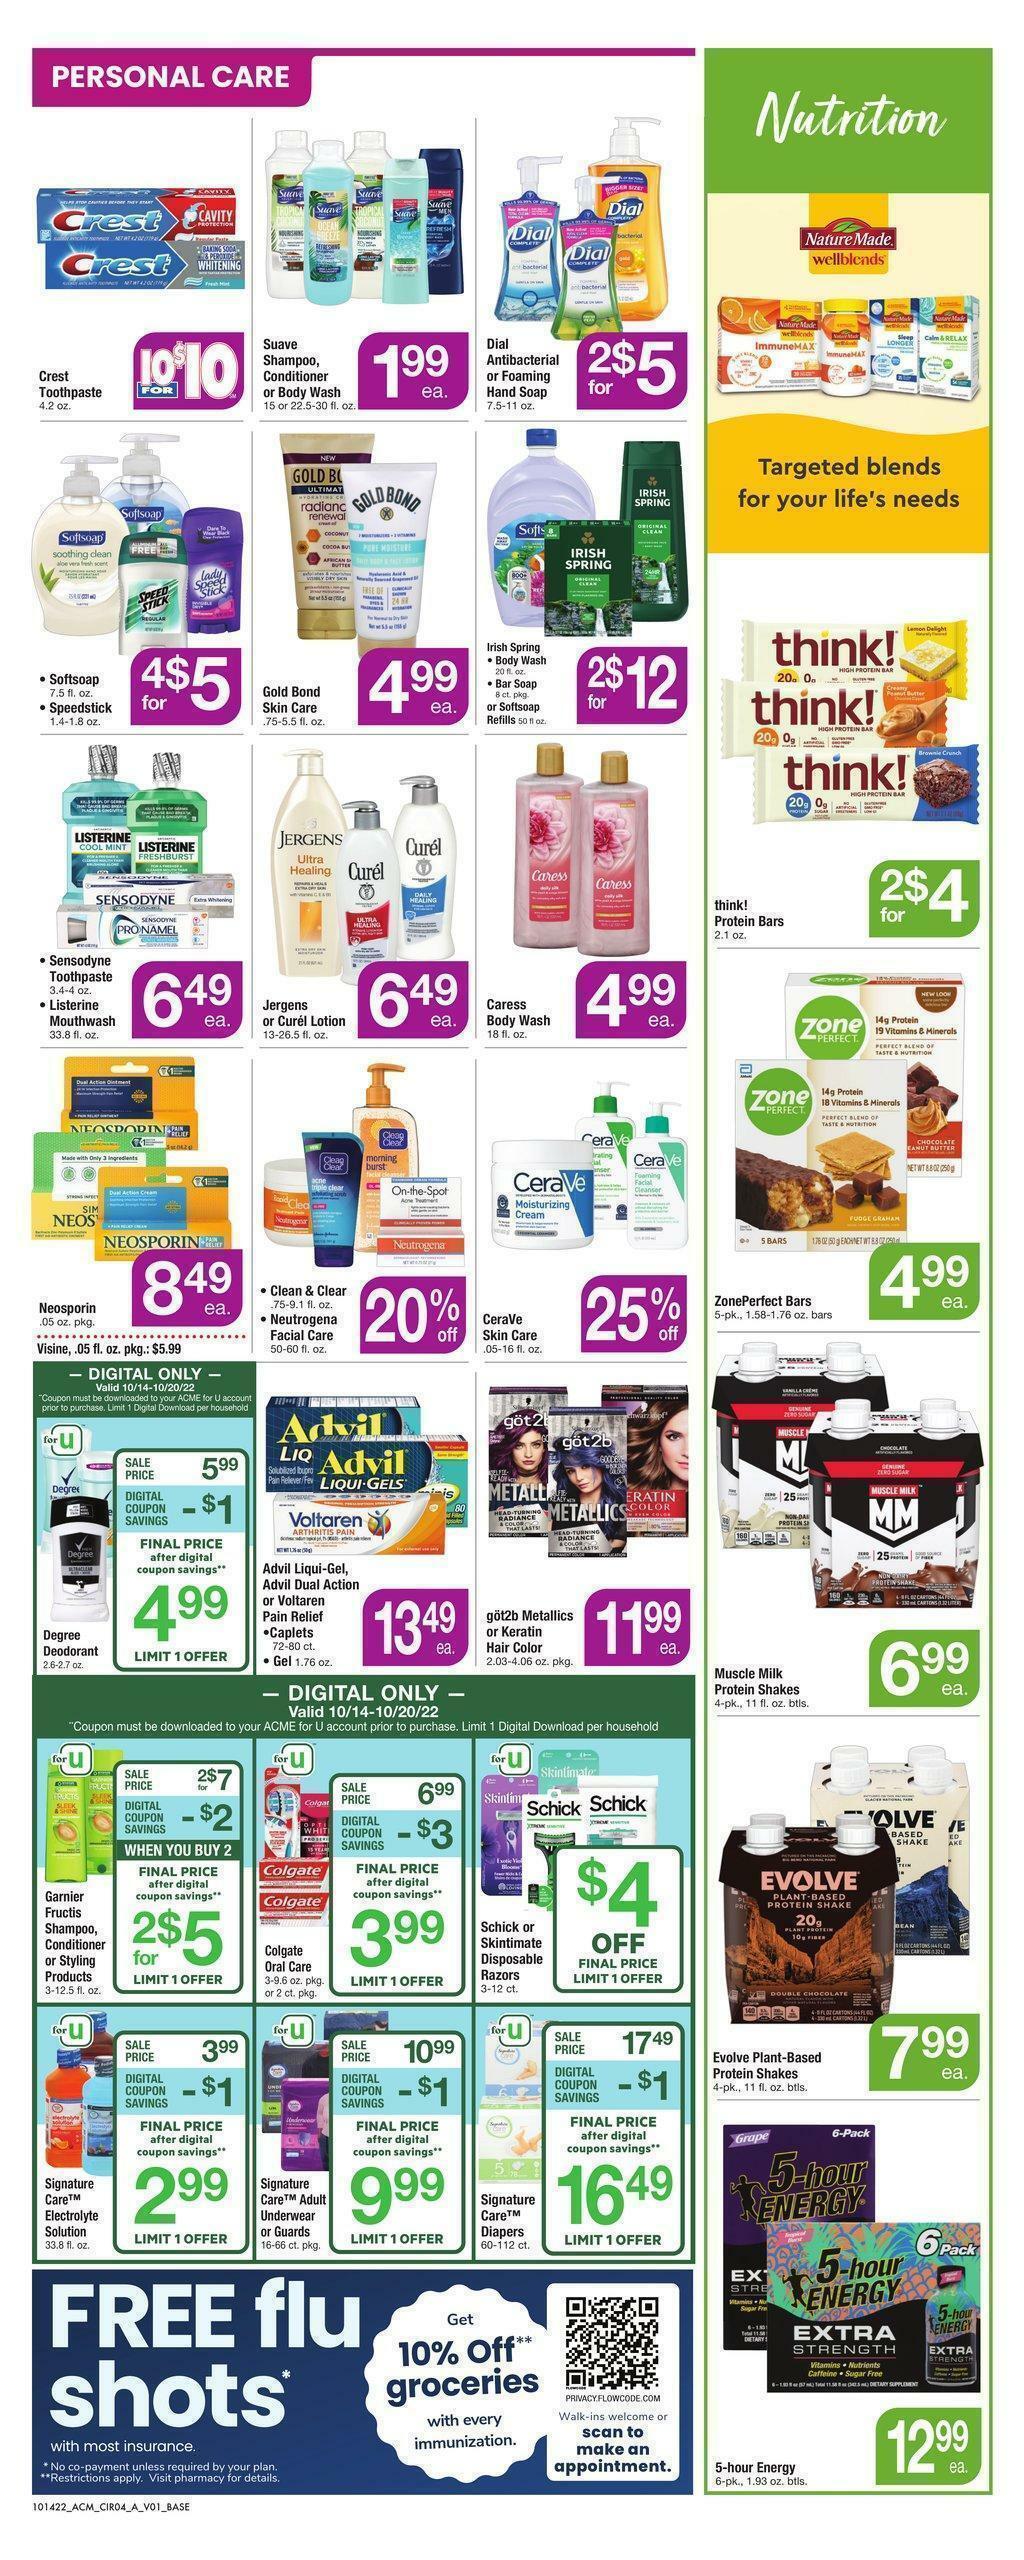 ACME Markets Weekly Ad from October 14